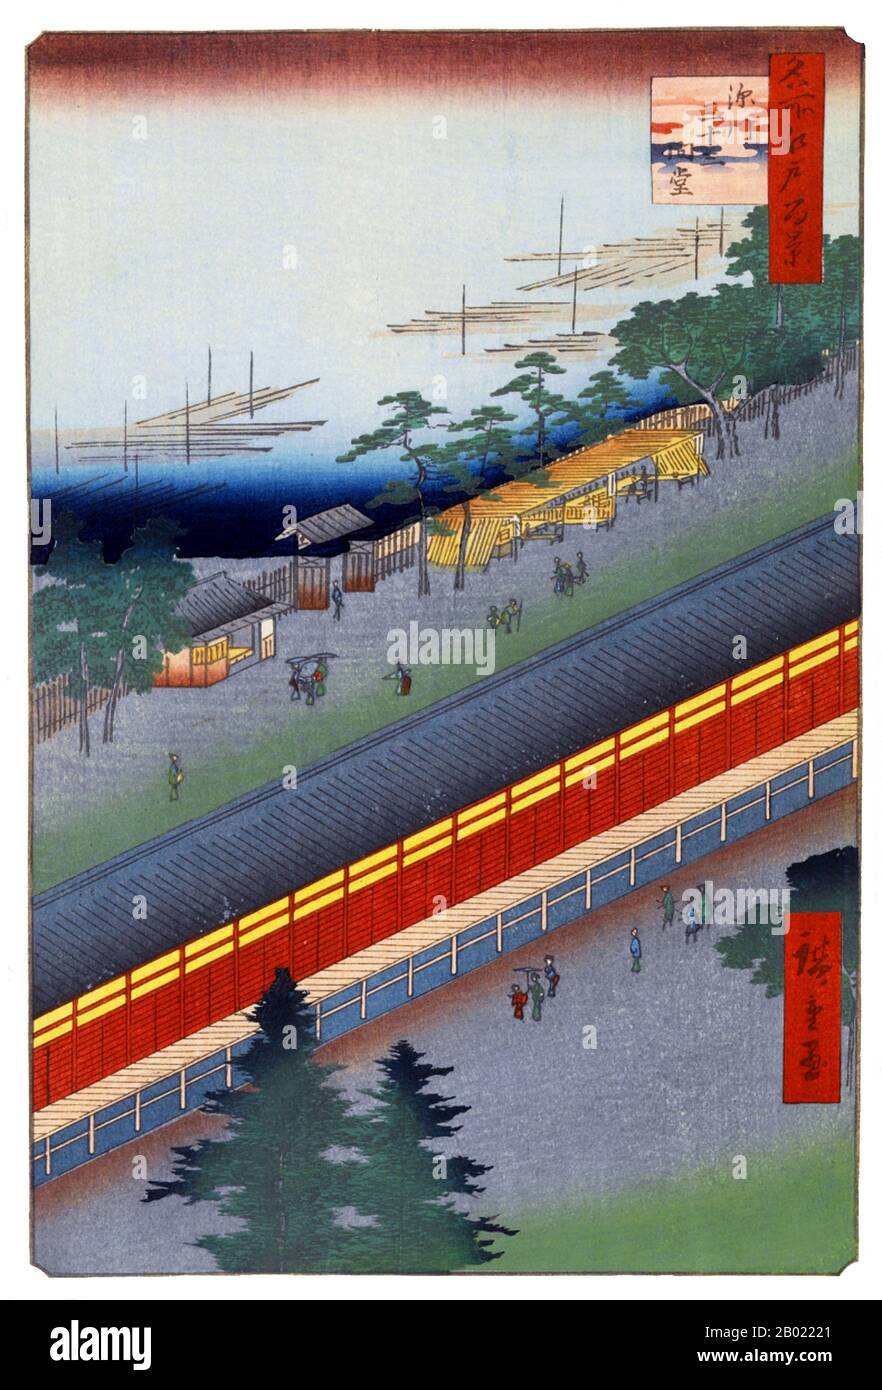 Hiroshige's One Hundred Famous Views of Edo (名所江戸百景), actually composed of 118 woodblock landscape and genre scenes of mid-19th century Tokyo, is one of the greatest achievements of Japanese art. The series includes many of Hiroshige's most famous prints. It represents a celebration of the style and world of Japan's finest cultural flowering at the end of the Tokugawa Shogunate.  The series continues with summer (夏の部). Summer amusements of the Fourth, Fifth, and Sixth Months are represented in numbers 43 through 72. Evening outings in pleasure boats on the Sumida River were taken along the man Stock Photo